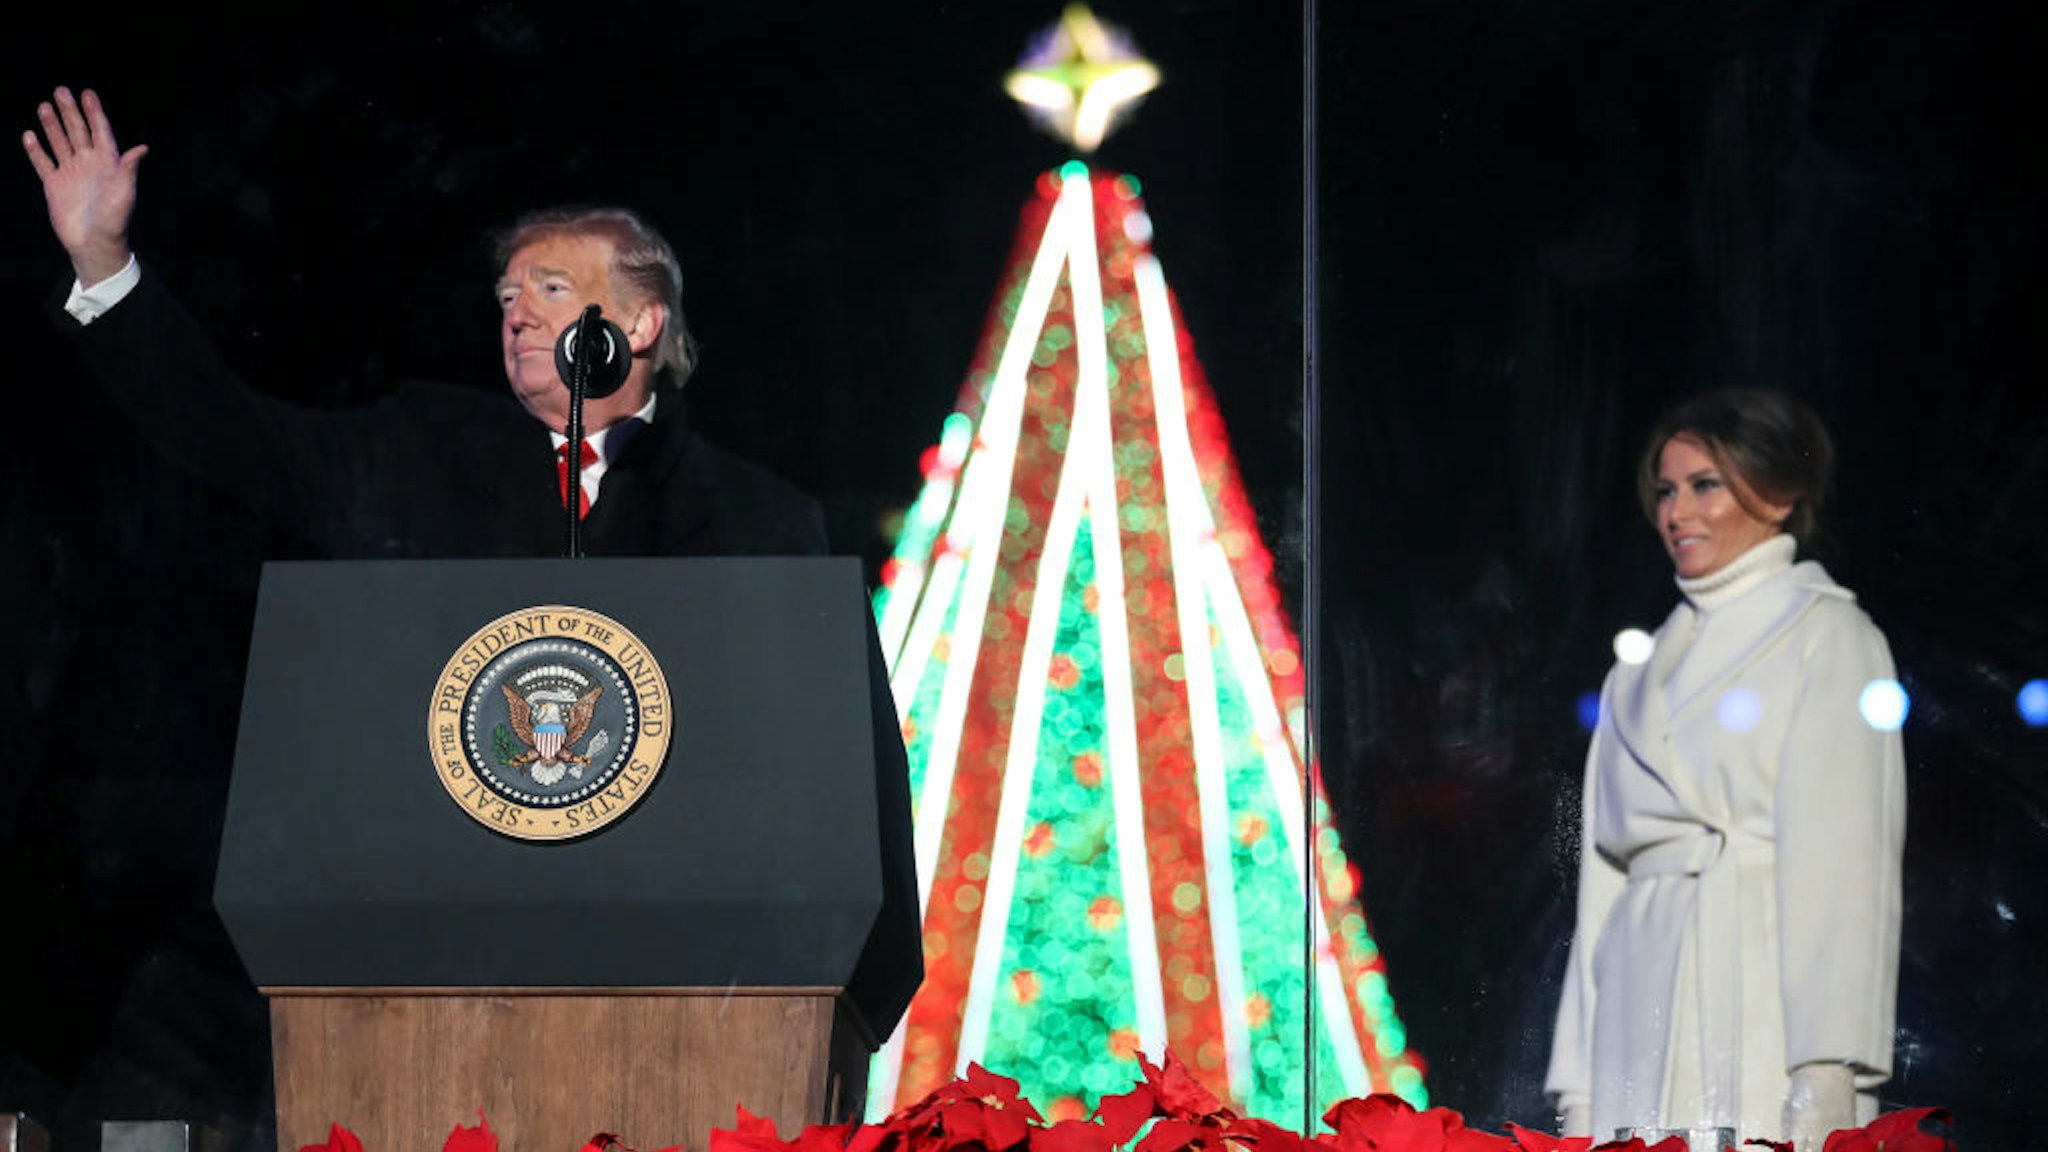 President Donald Trump waves to the audience during the National Christmas Tree lighting ceremony held by the National Park Service at the Ellipse near the White House on November 28, 2018 in Washington, DC.